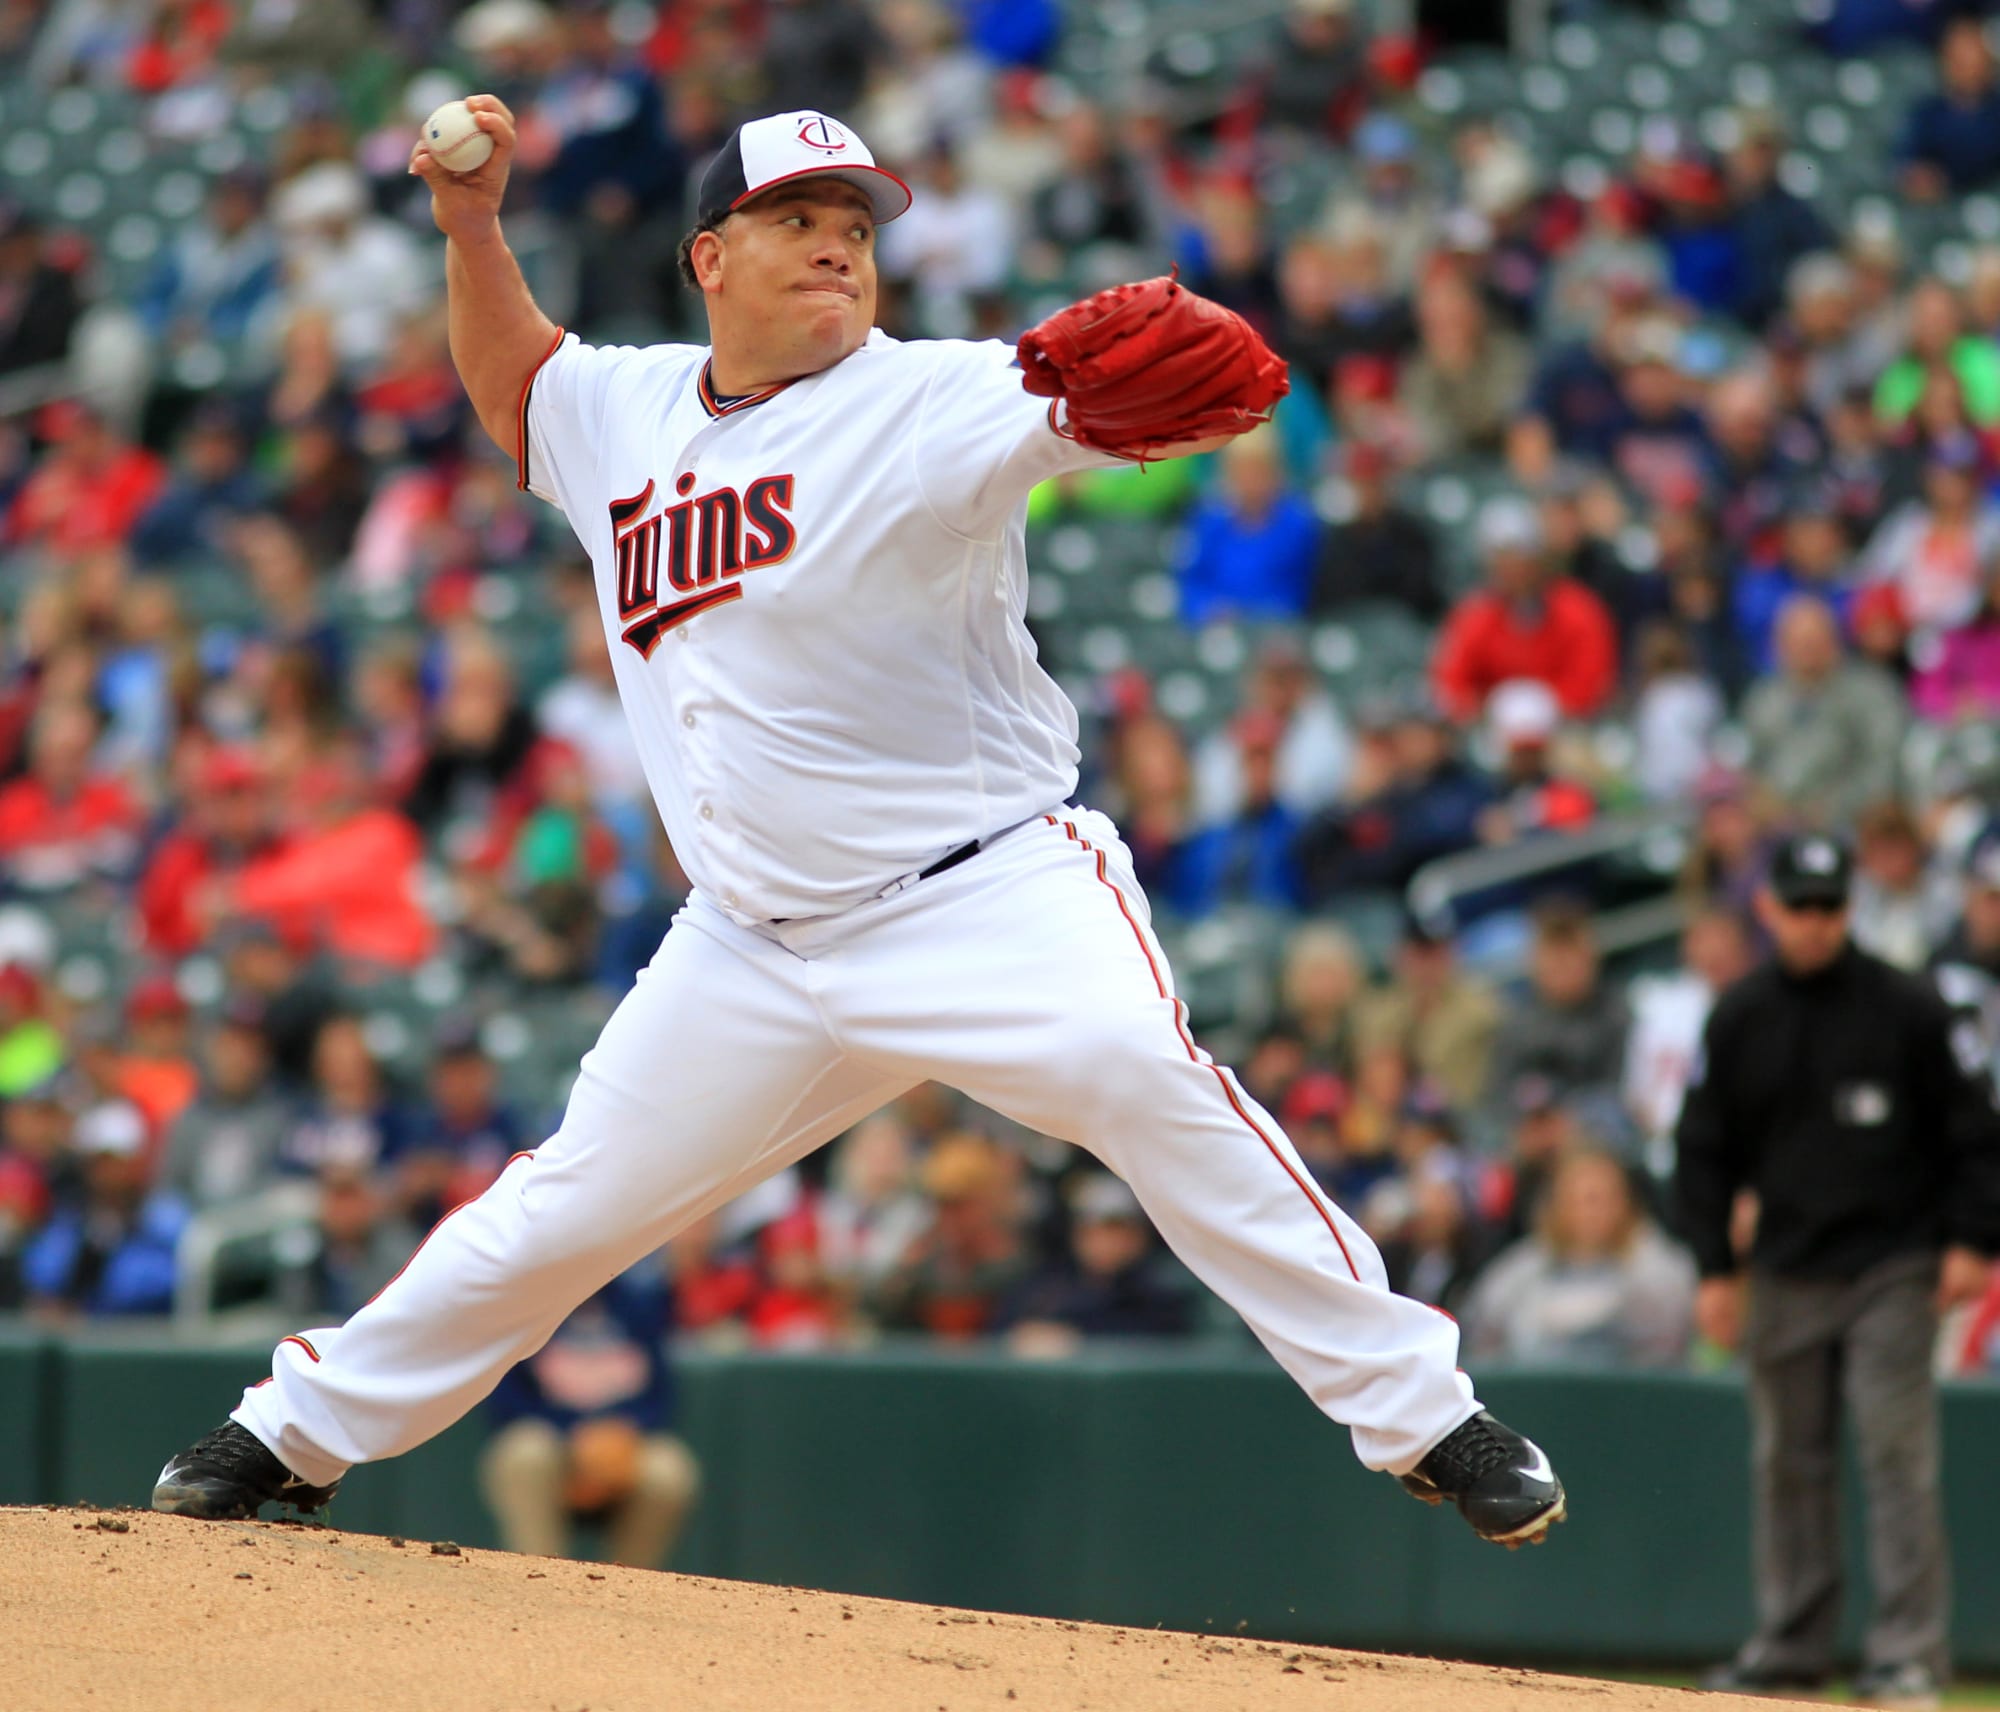 Minnesota Twins Bartolo Colon deserves to be on the Twins playoff roster